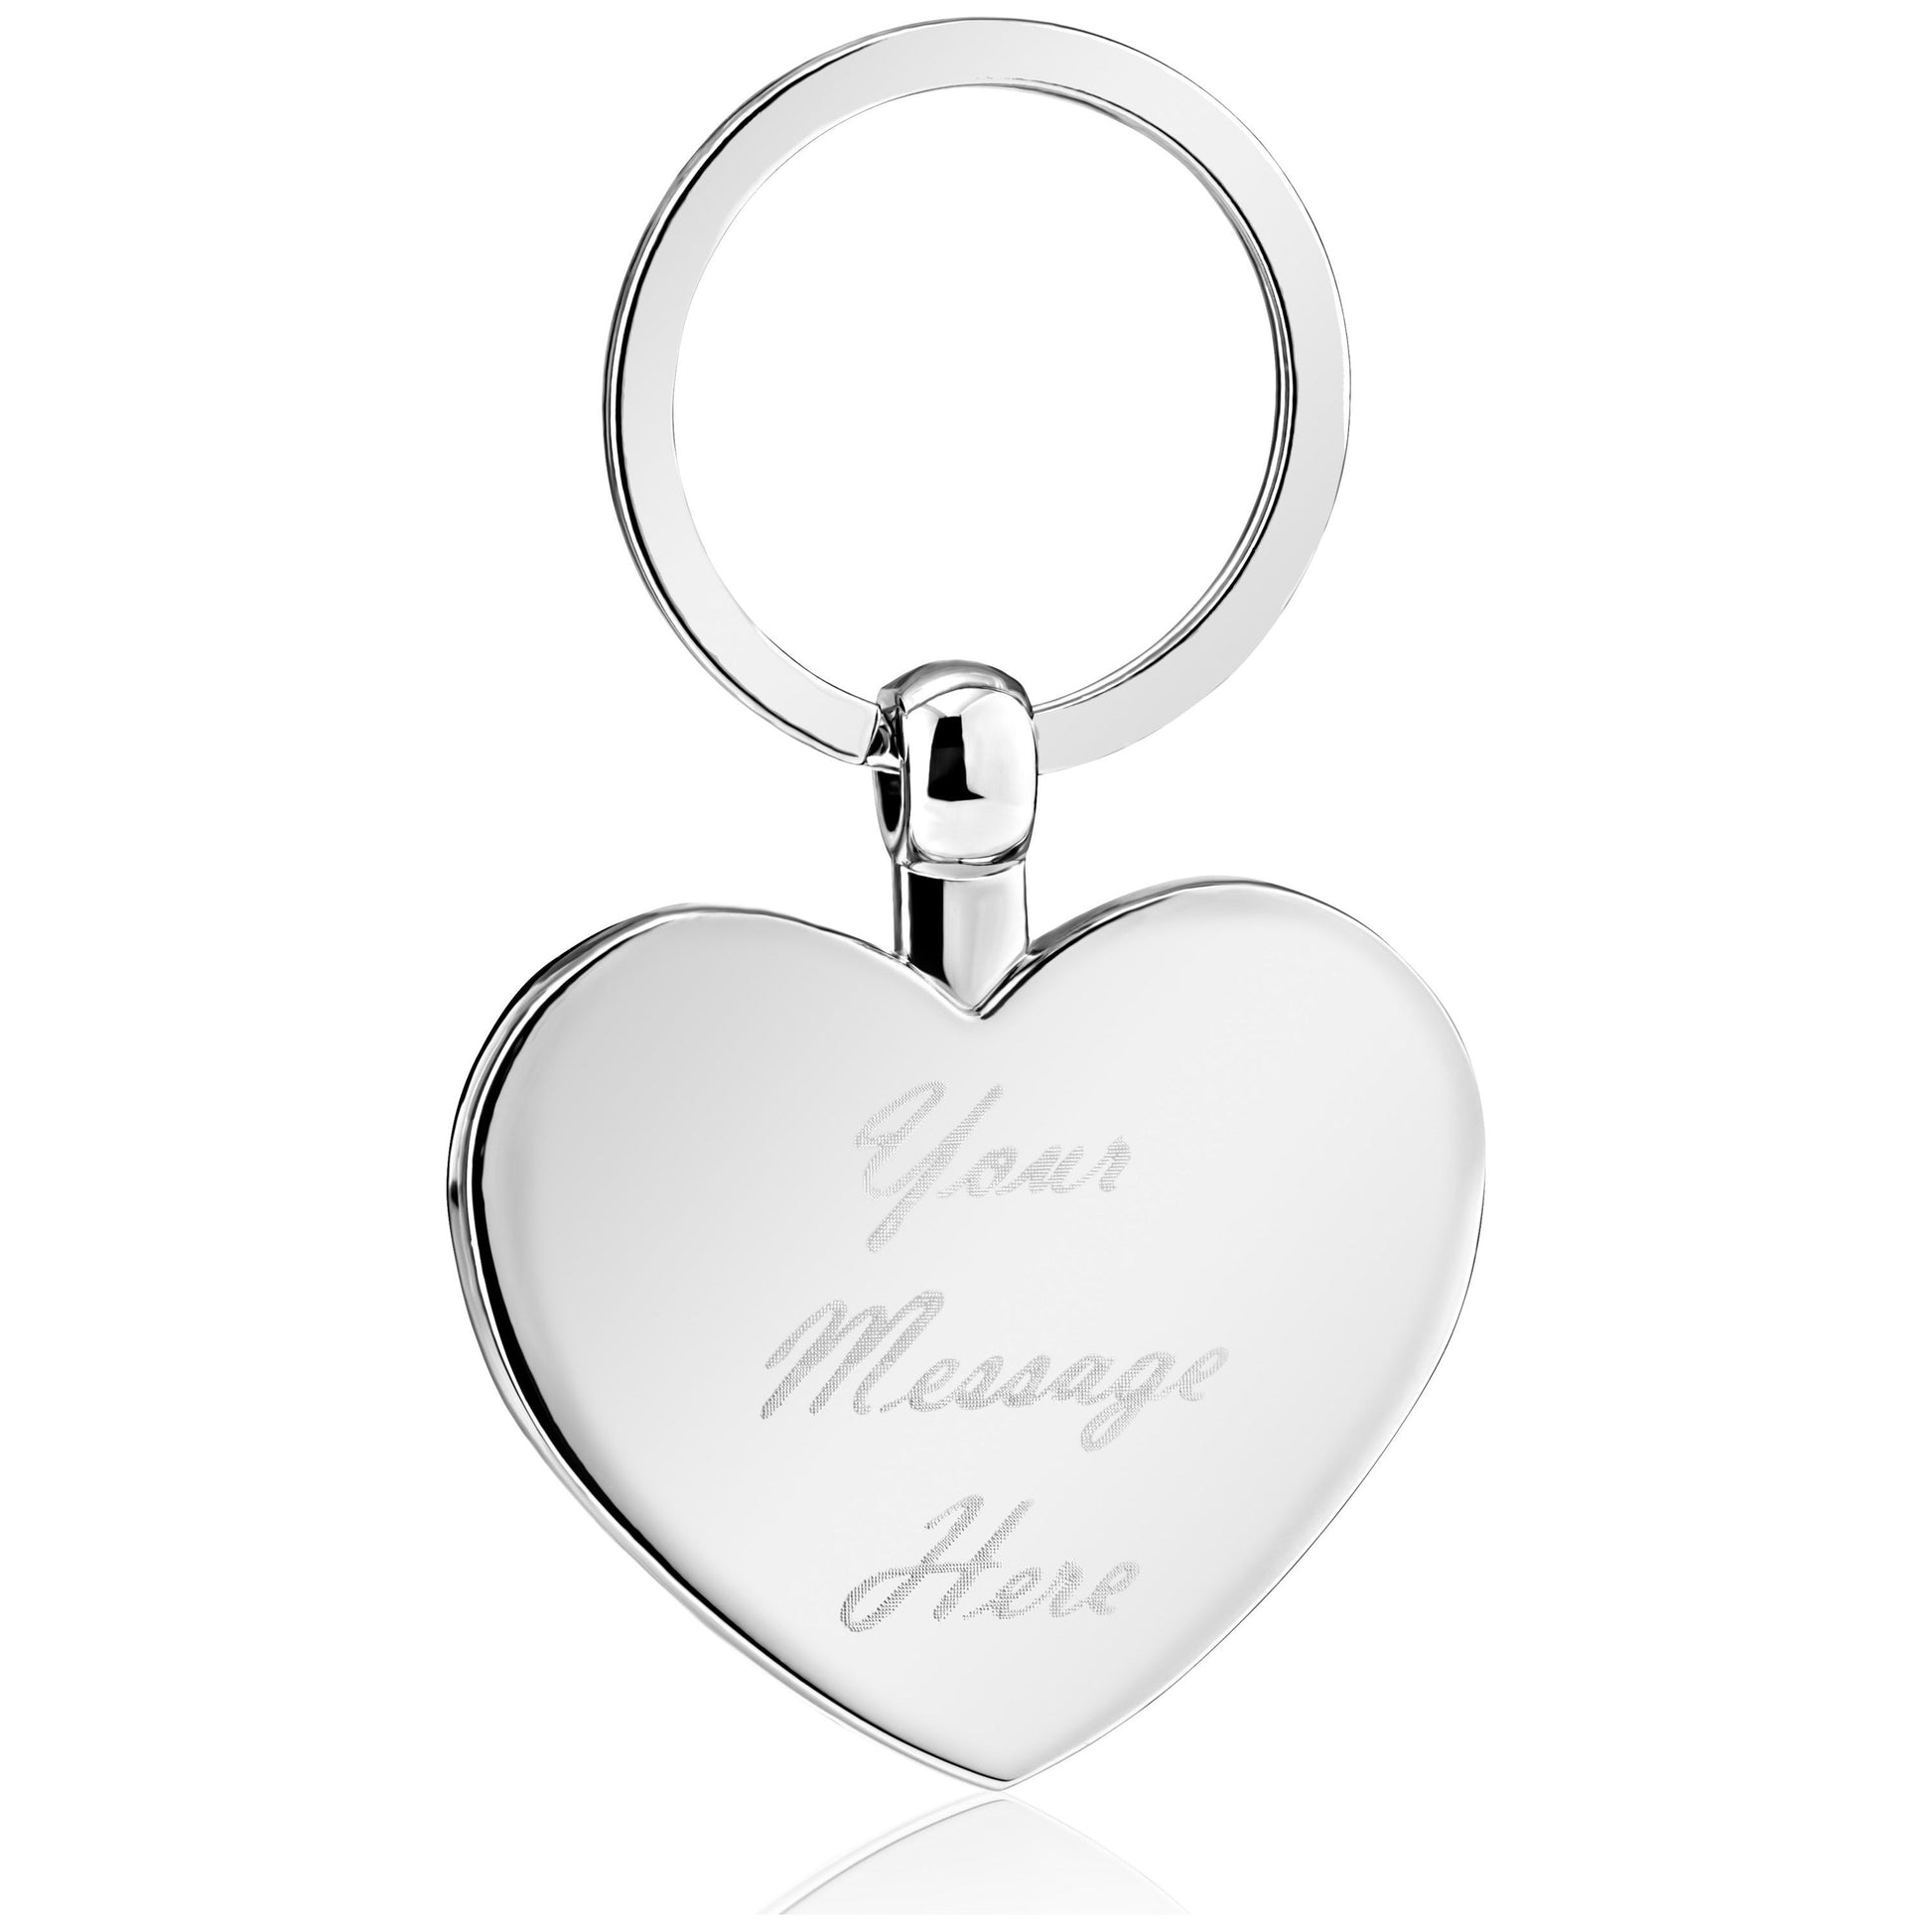 Silver Heart Shaped Keyring Engraved and Personalised - Ashton and Finch